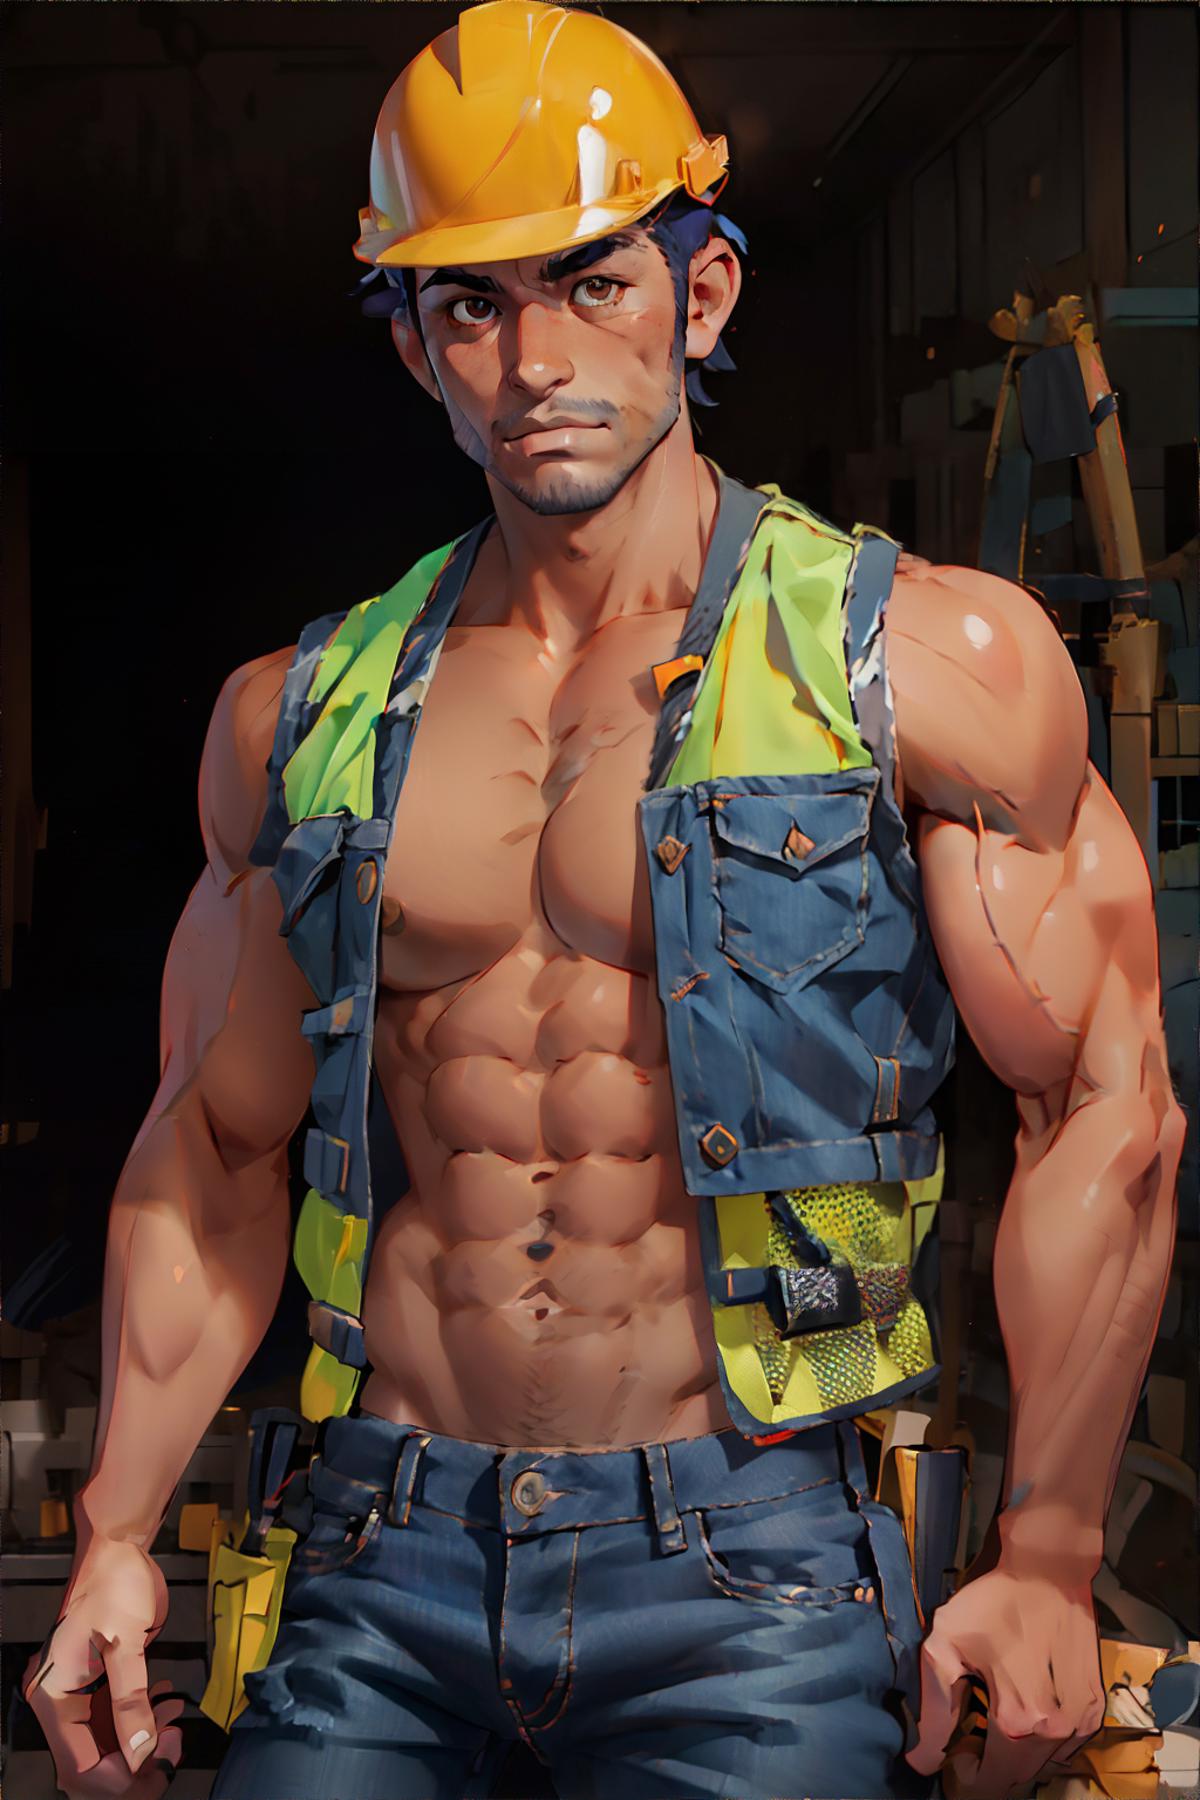 Sexy Construction Worker image by omgbecky